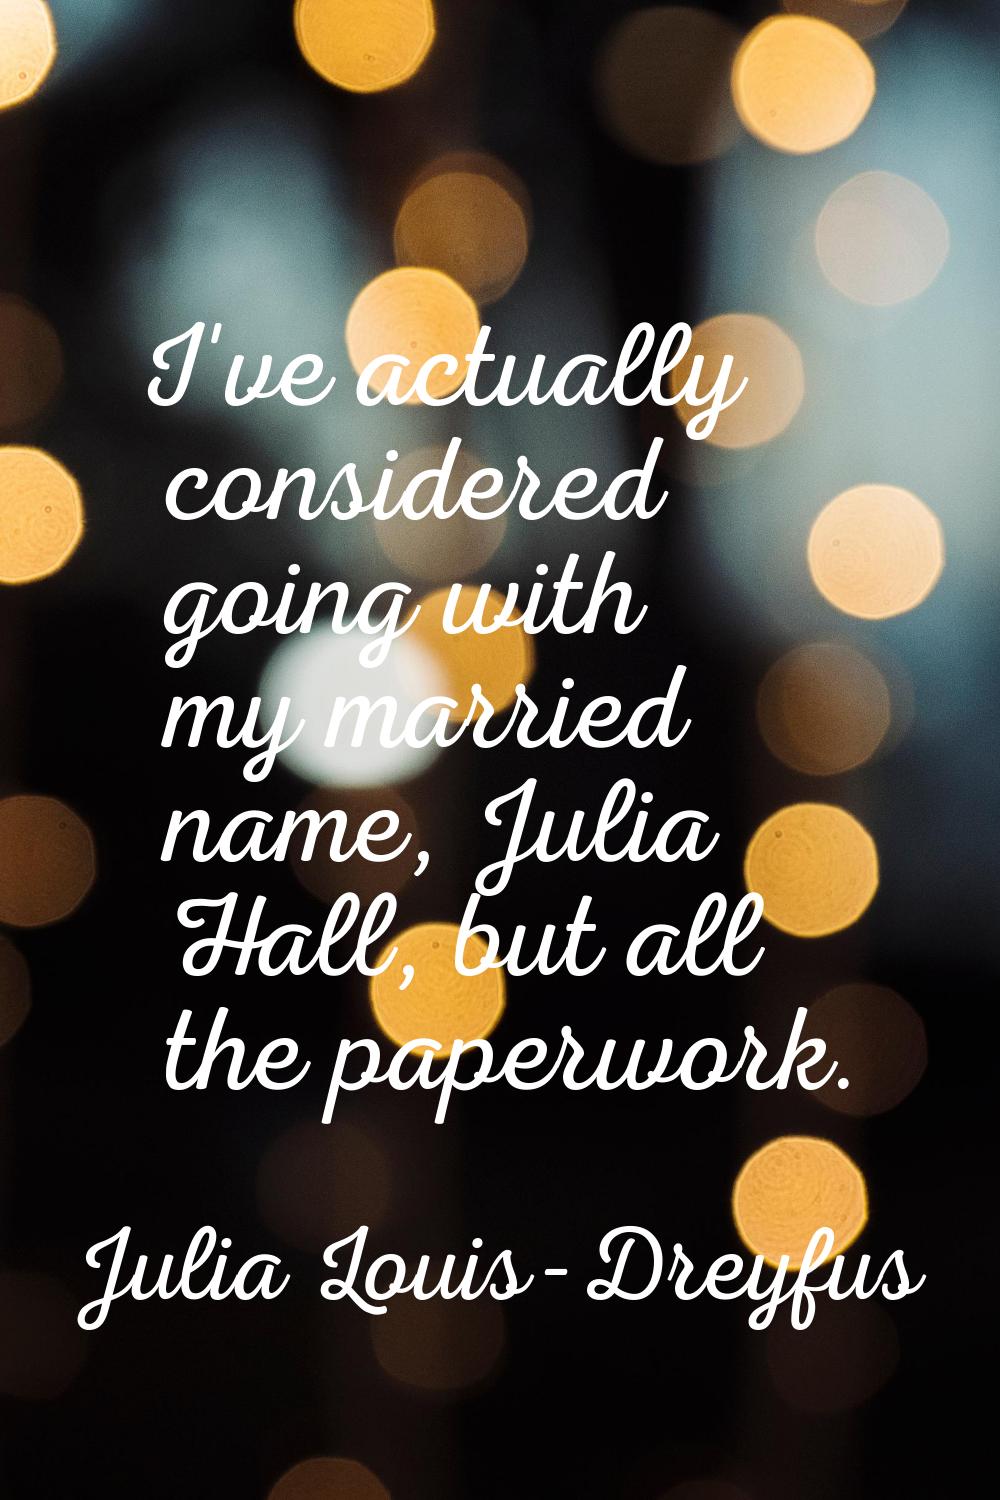 I've actually considered going with my married name, Julia Hall, but all the paperwork.